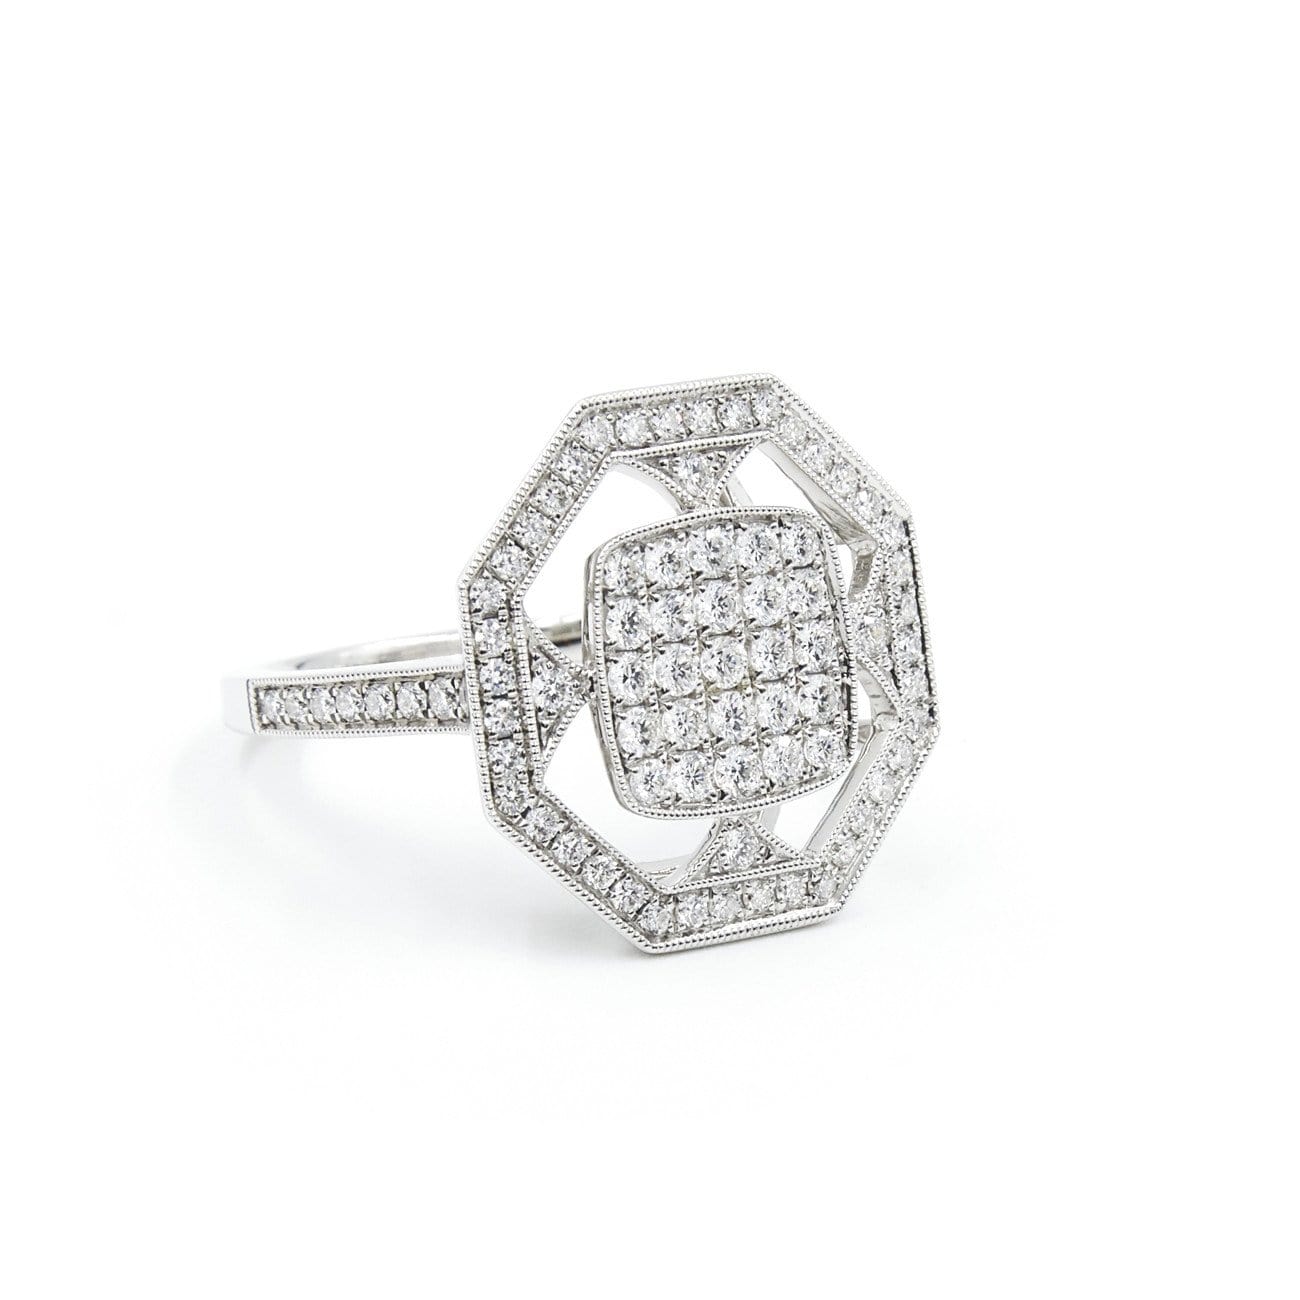 CHRIS AIRE DIAMOND RING - Chris Aire Fine Jewelry & Timepieces